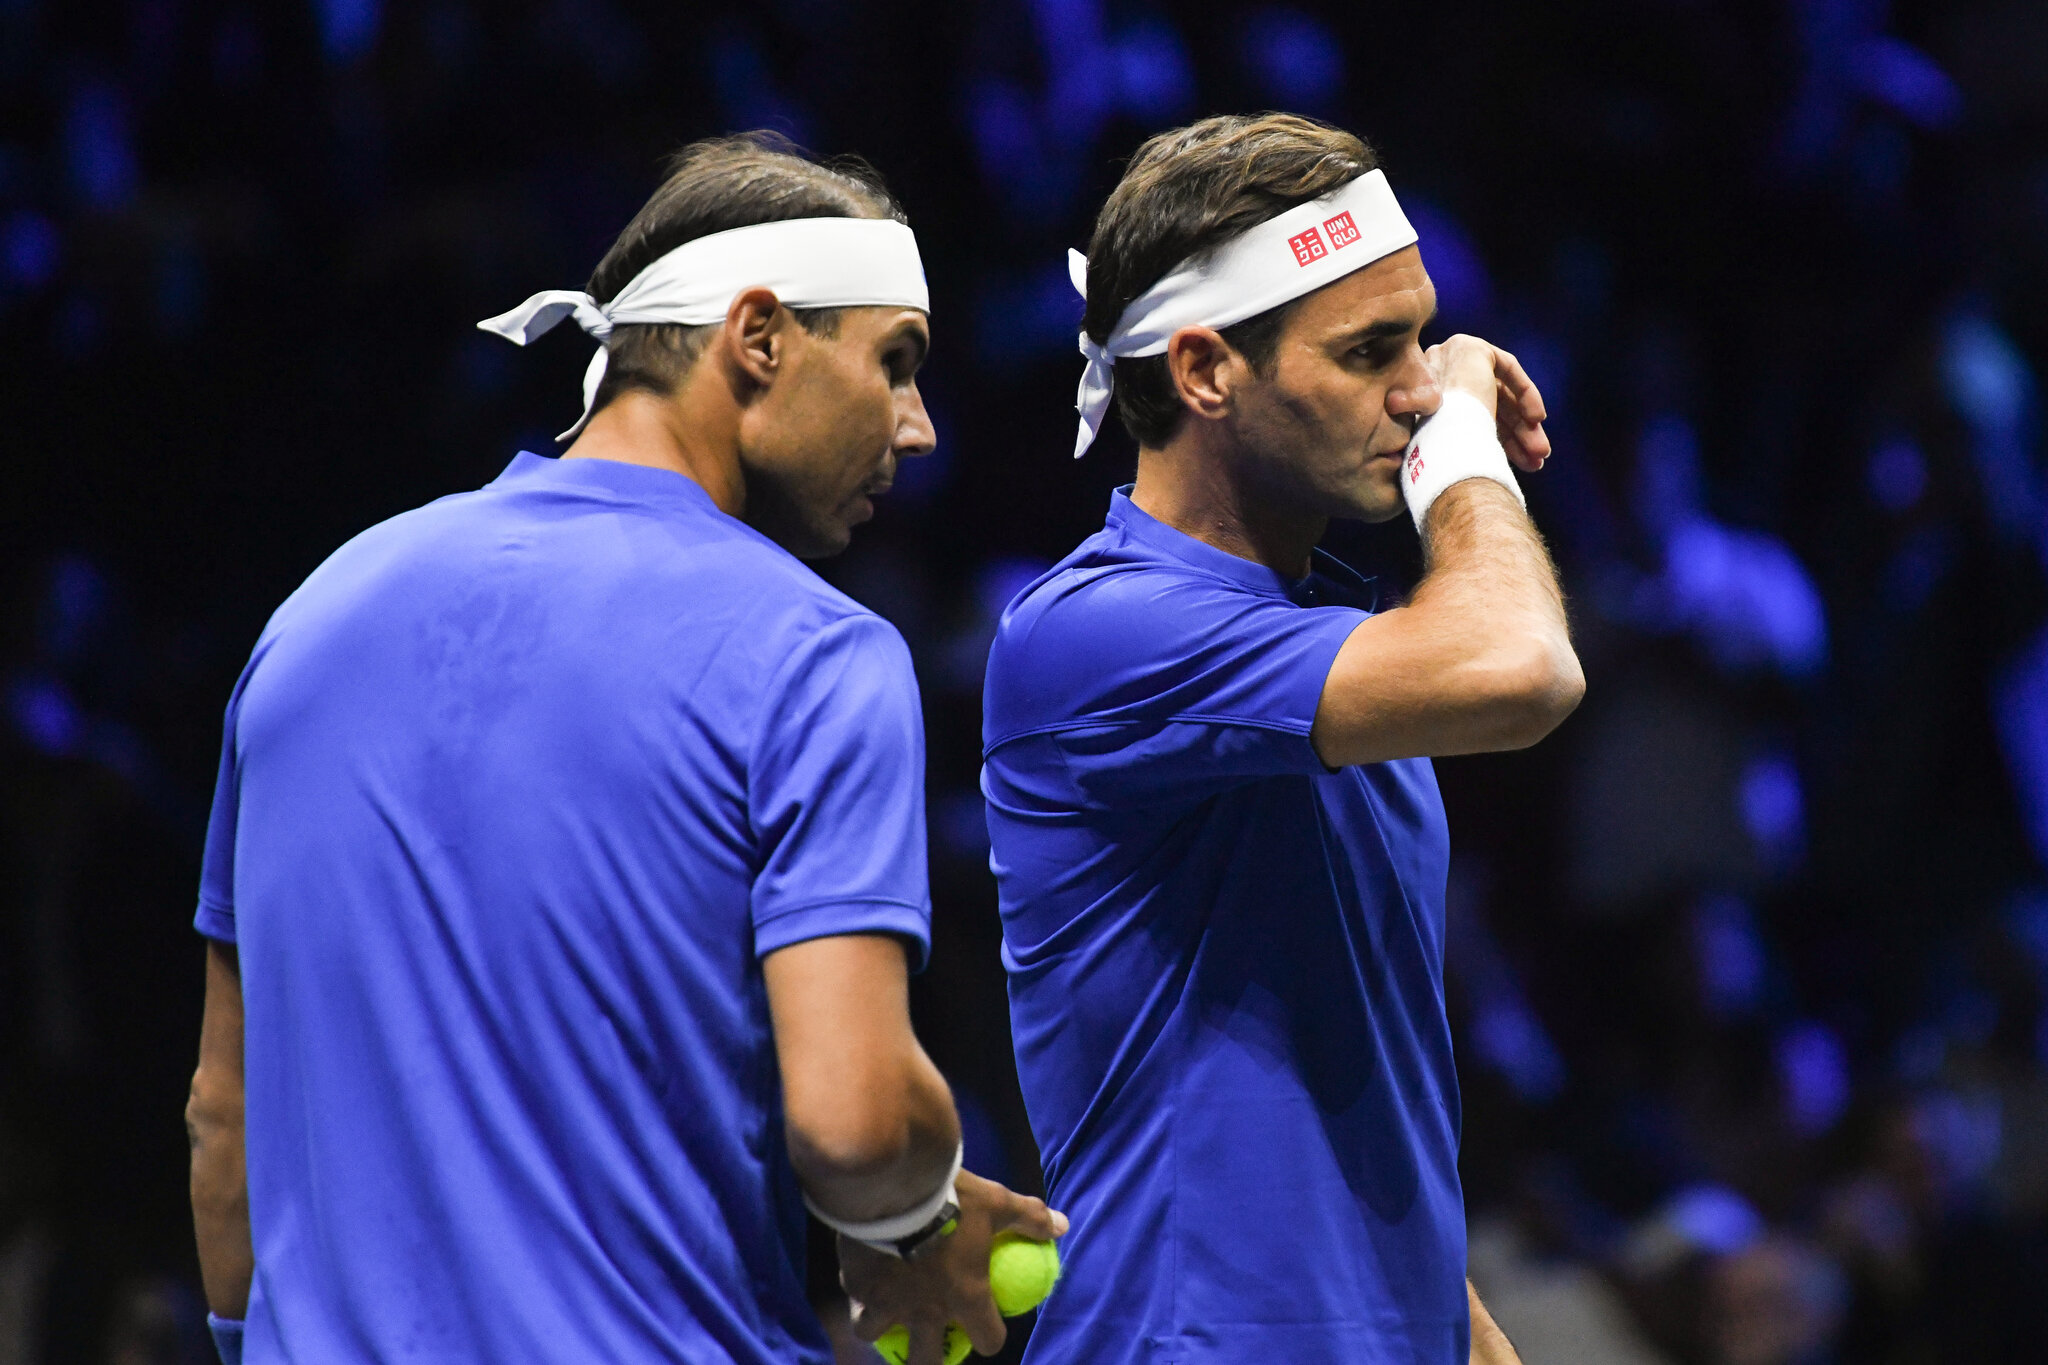 Laver Cup Live Updates and Results: Federer and Nadal Play Doubles